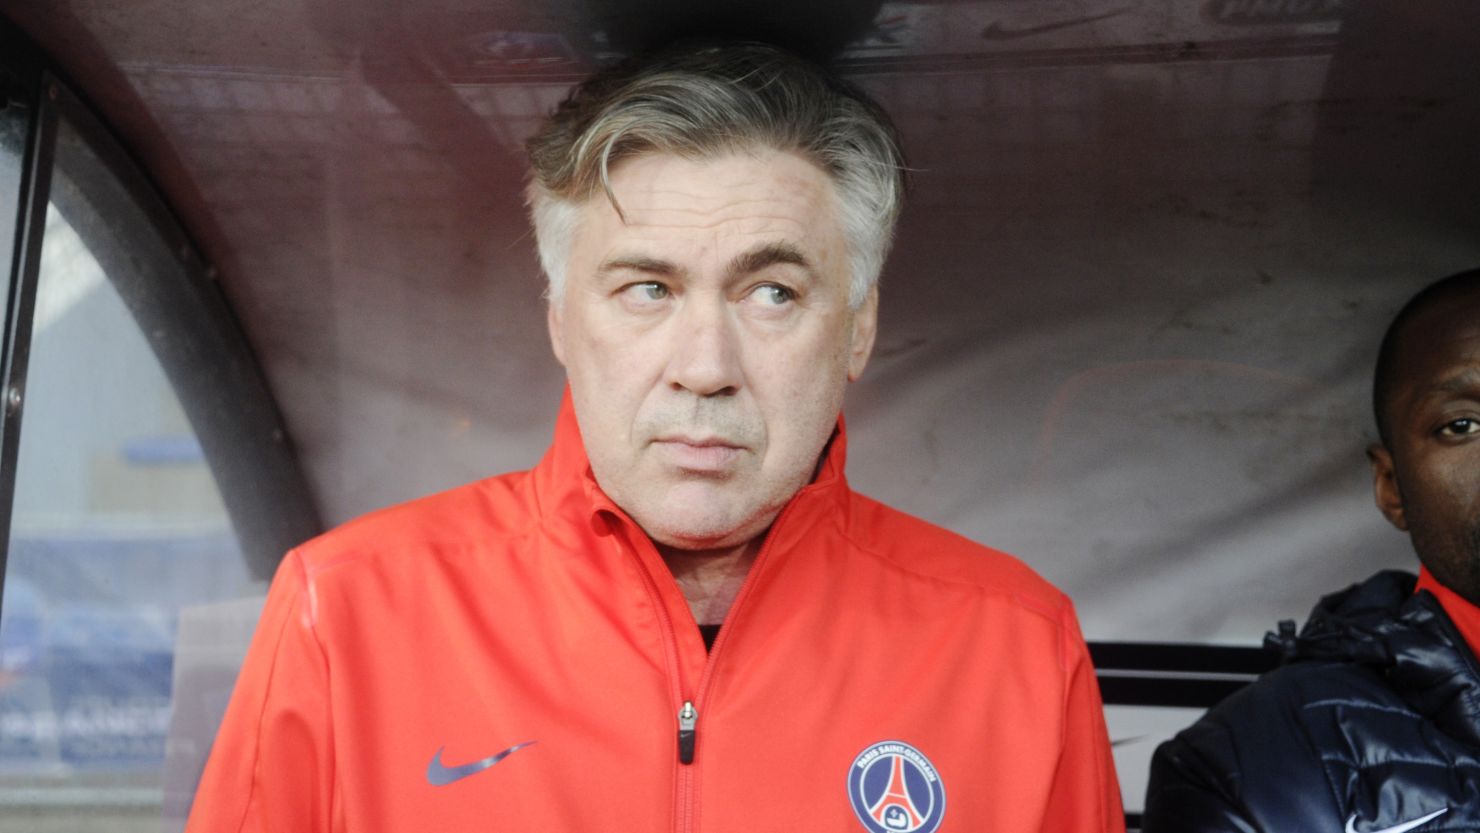 Italian coach Carlo Ancelotti won the English Premier League and FA Cup double as Chelsea manager in 2010.